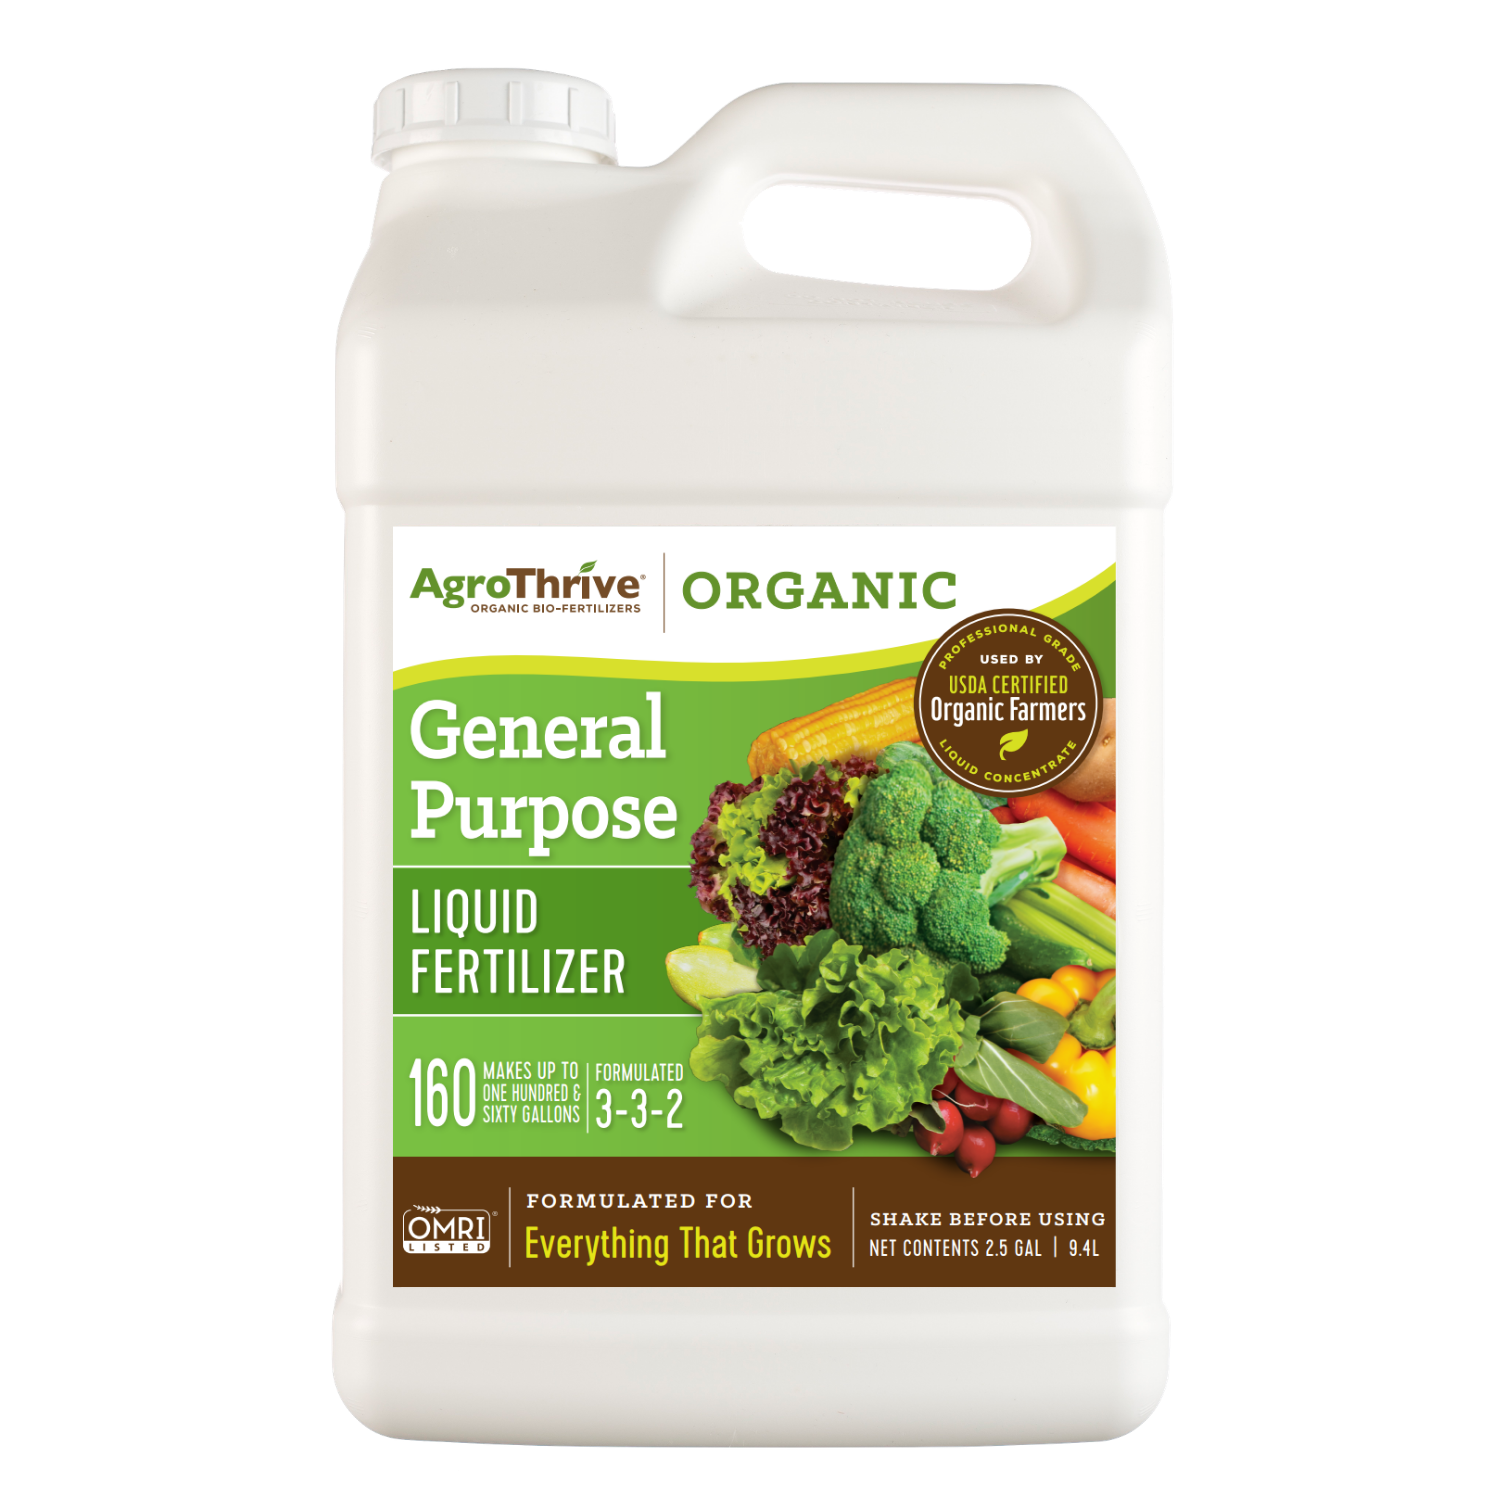 AgroThrive Organic Liquid Fertilizer | General Purpose | For plants, vegetables, flowers, trees, lawns, and more